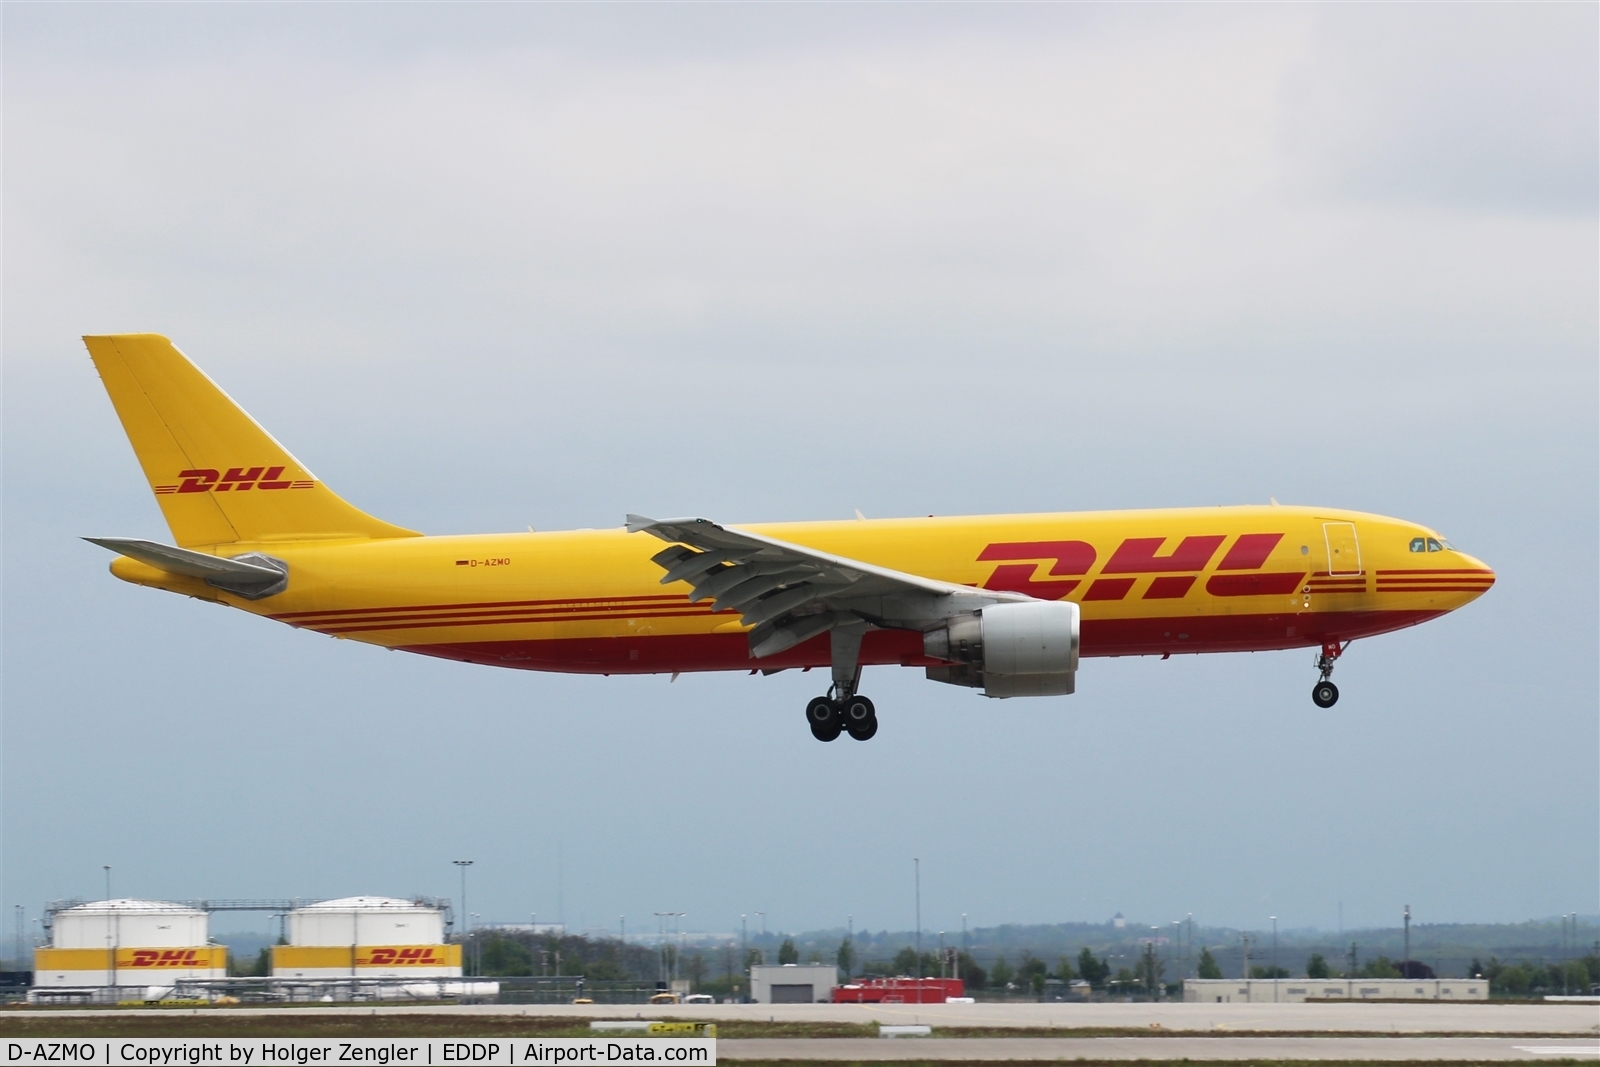 D-AZMO, 2006 Airbus A300F4-622R(F) C/N 0872, Floating along DHL fuel station.....